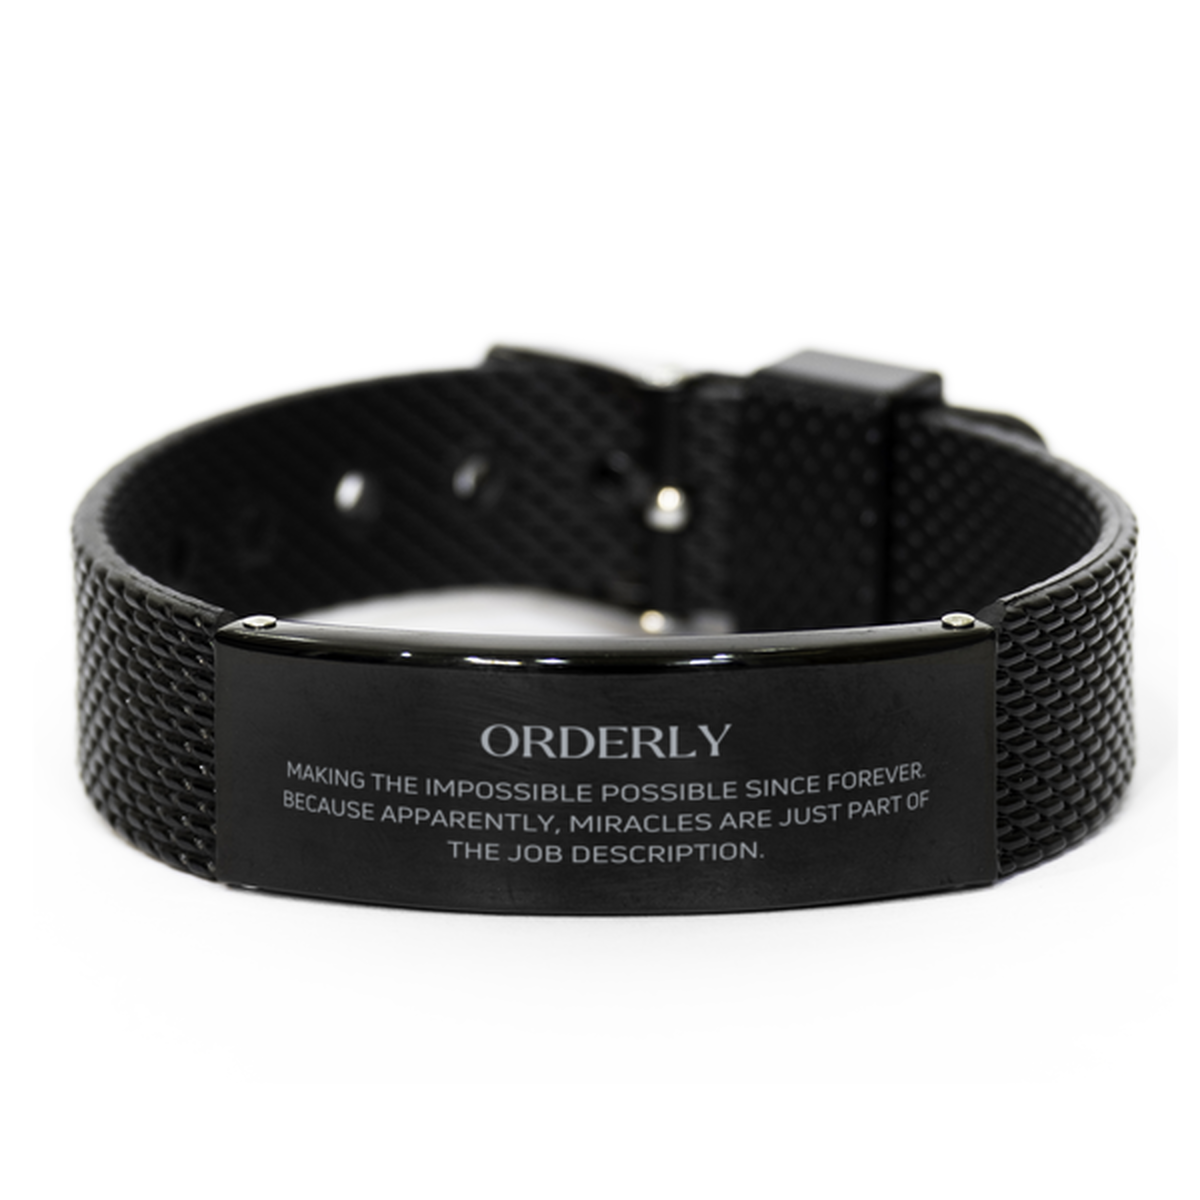 Funny Orderly Gifts, Miracles are just part of the job description, Inspirational Birthday Black Shark Mesh Bracelet For Orderly, Men, Women, Coworkers, Friends, Boss